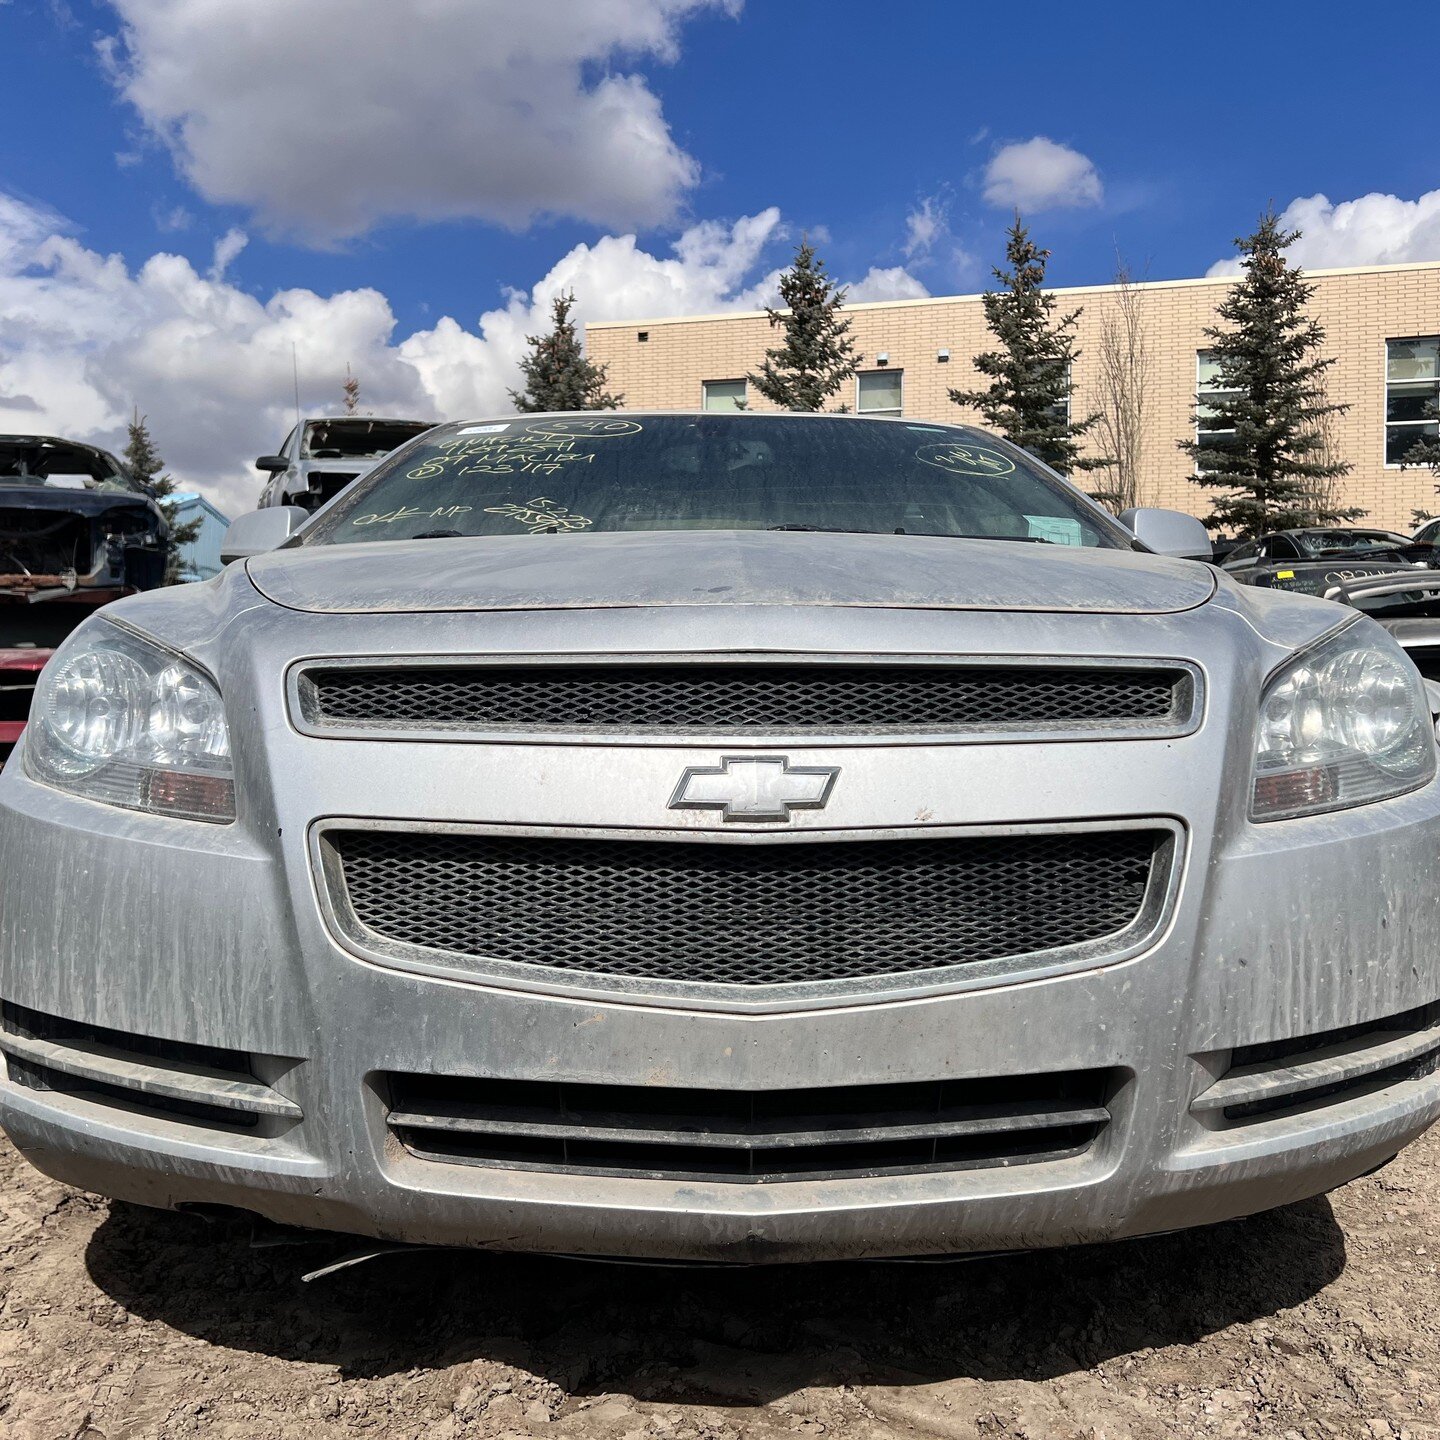 2009 CHEVROLET MALIBU 2LT 3.6L *FOR PARTS* - 4WD, 6 SPEED AUTOMATIC TRANSMISSION, 6 CYCLINDER , GREY(636R), KMS:116984, VIN:1G1ZJ577X9F123117

We offer contactless delivery and are more than willing to accommodate your needs.
Why pick your part when 